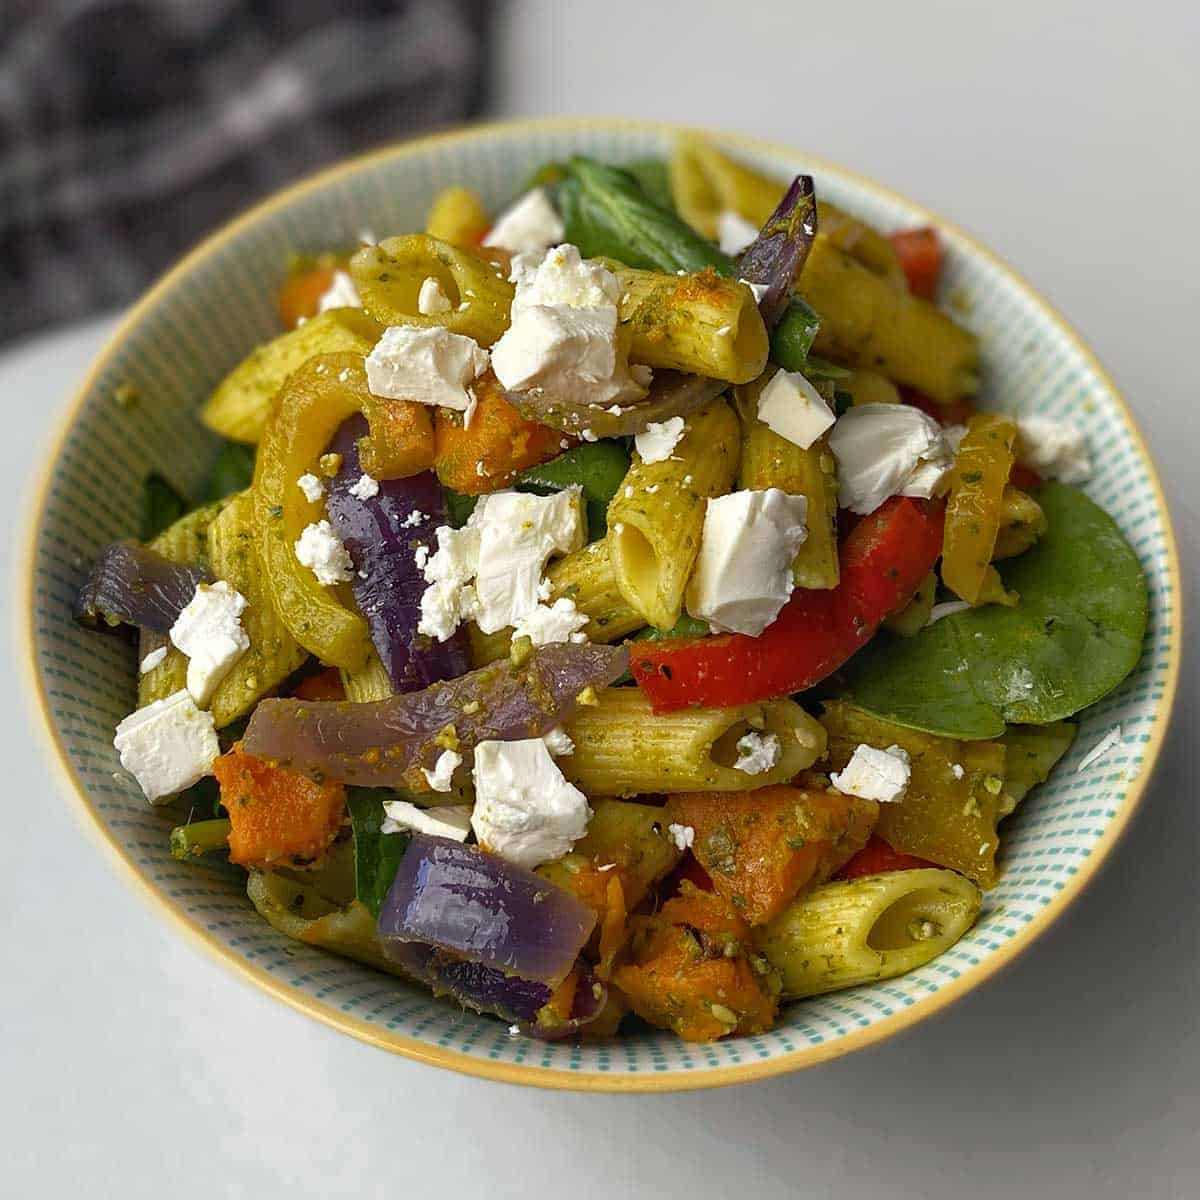 A close up of Roasted vegetable and pesto pasta salad in a white bowl on a bench.